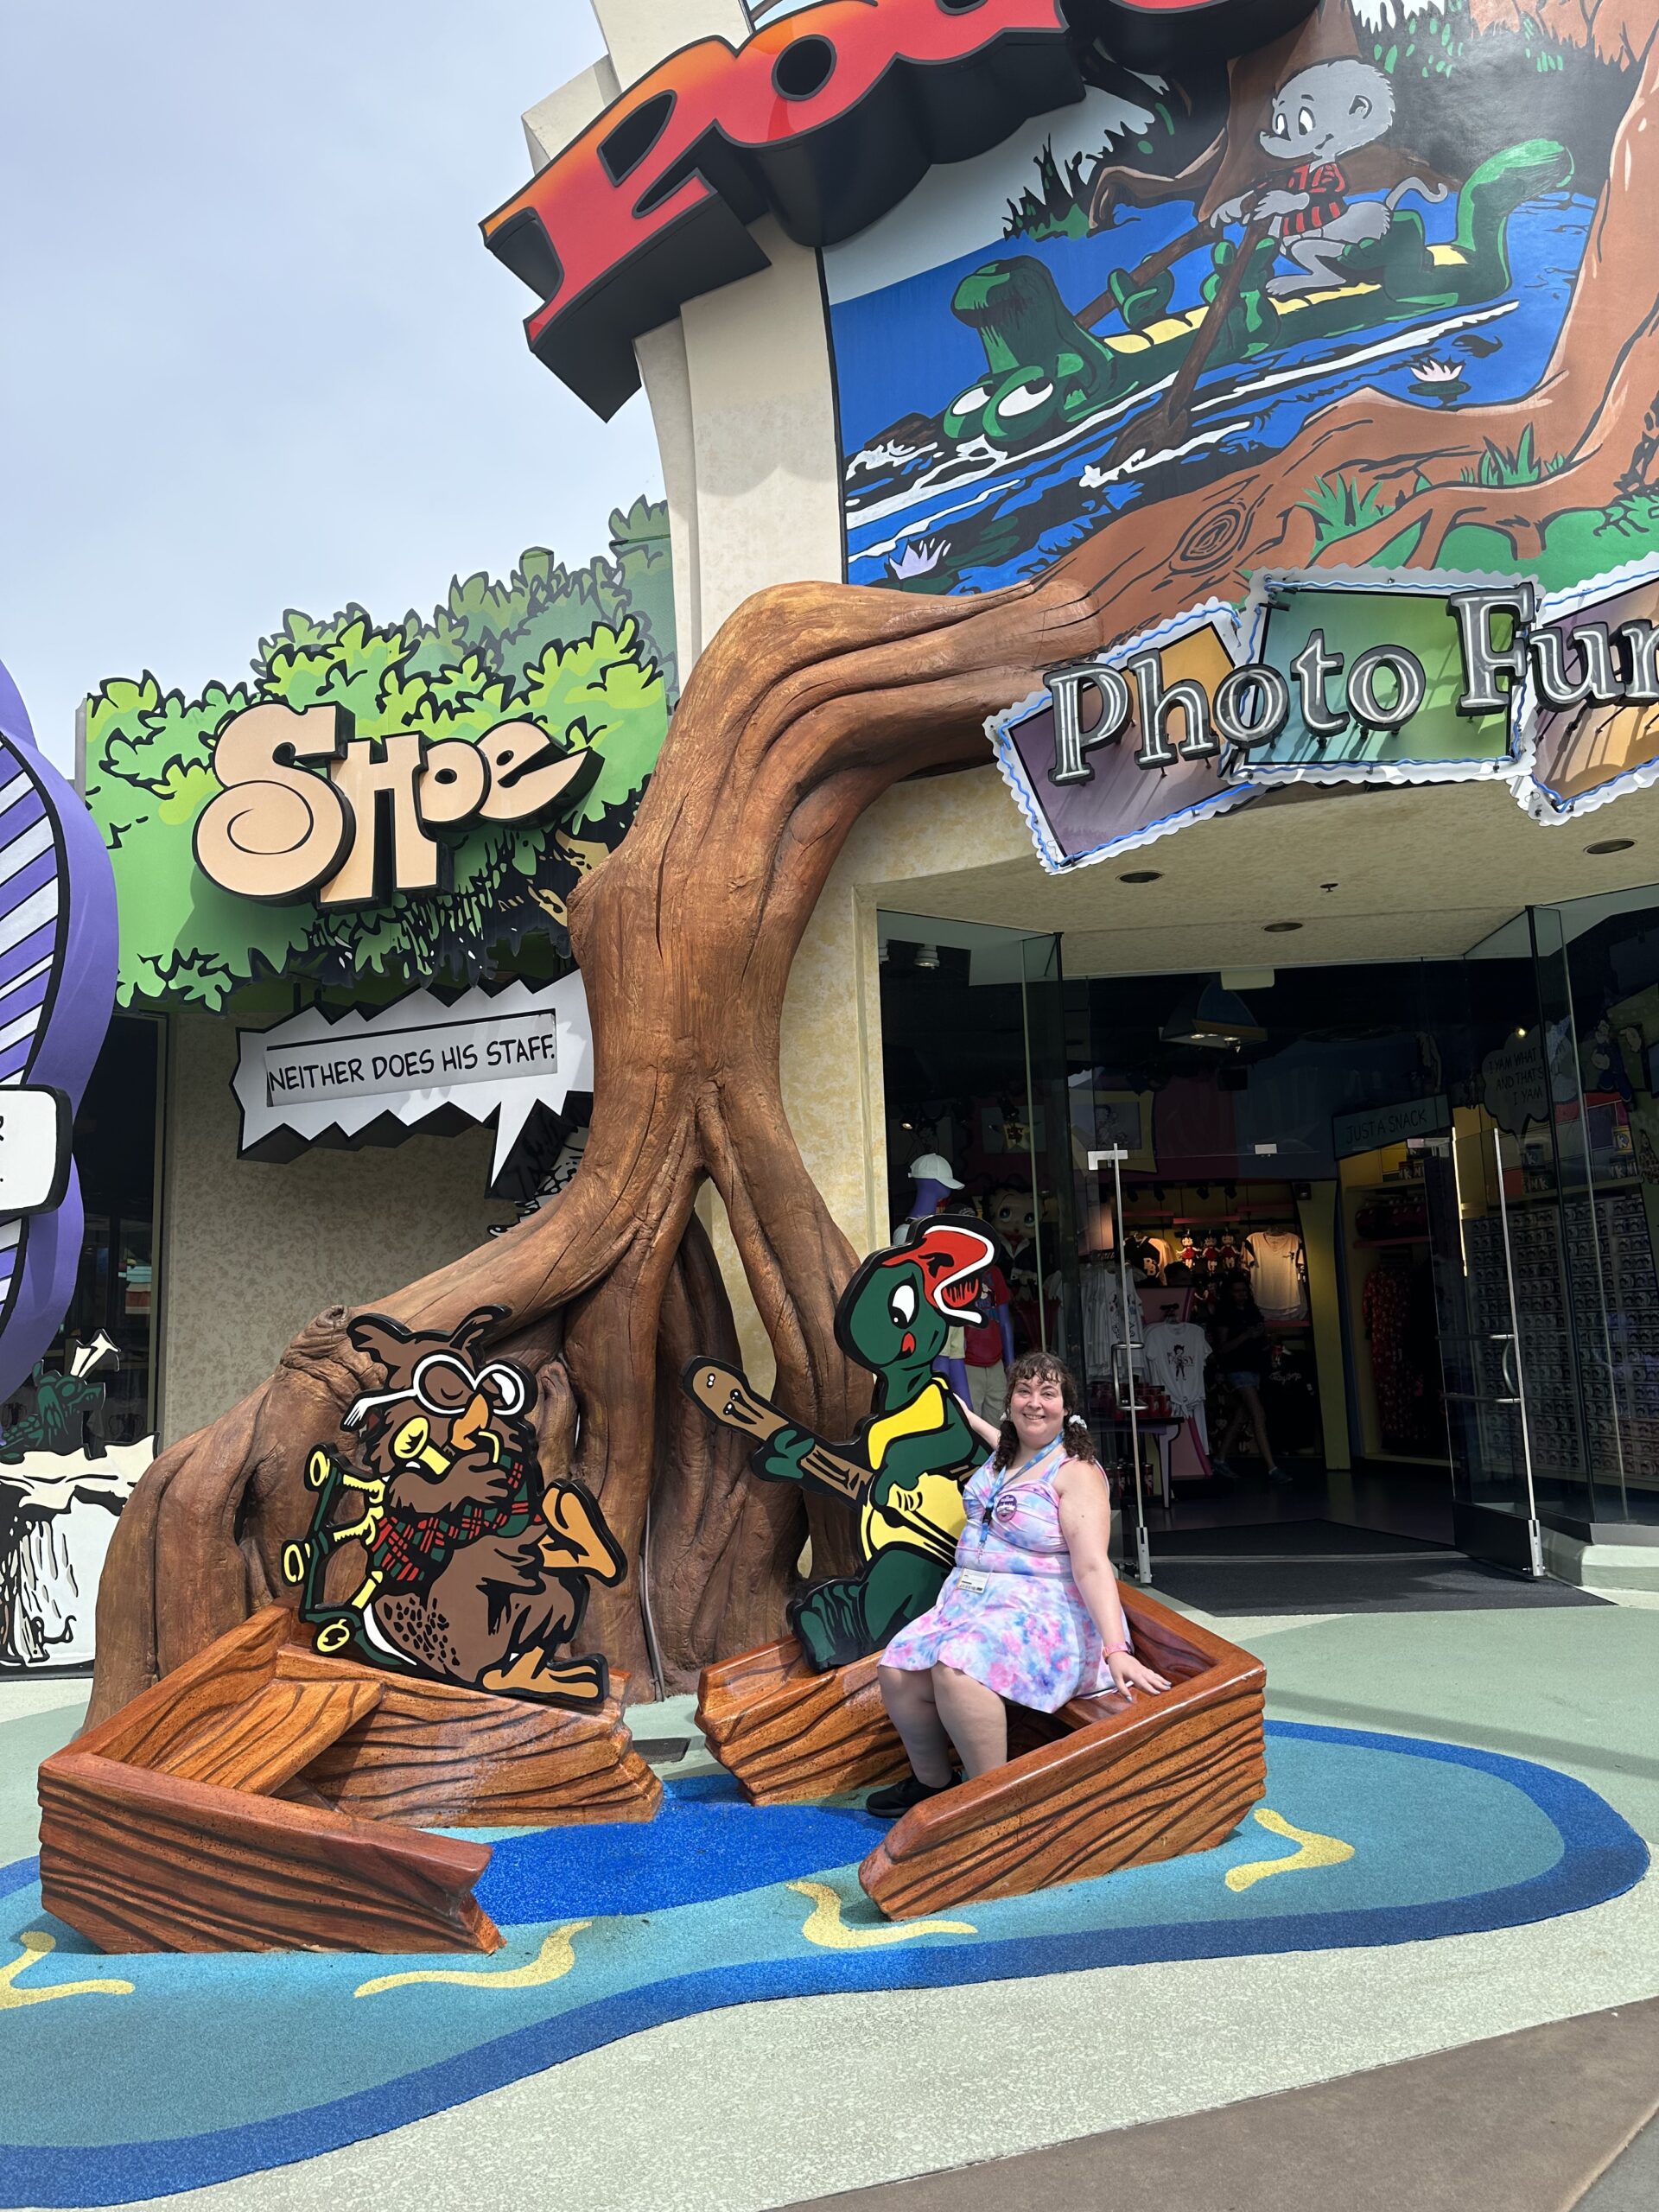 Guide to Toon Lagoon at Universal Islands of Adventure - Discover Universal